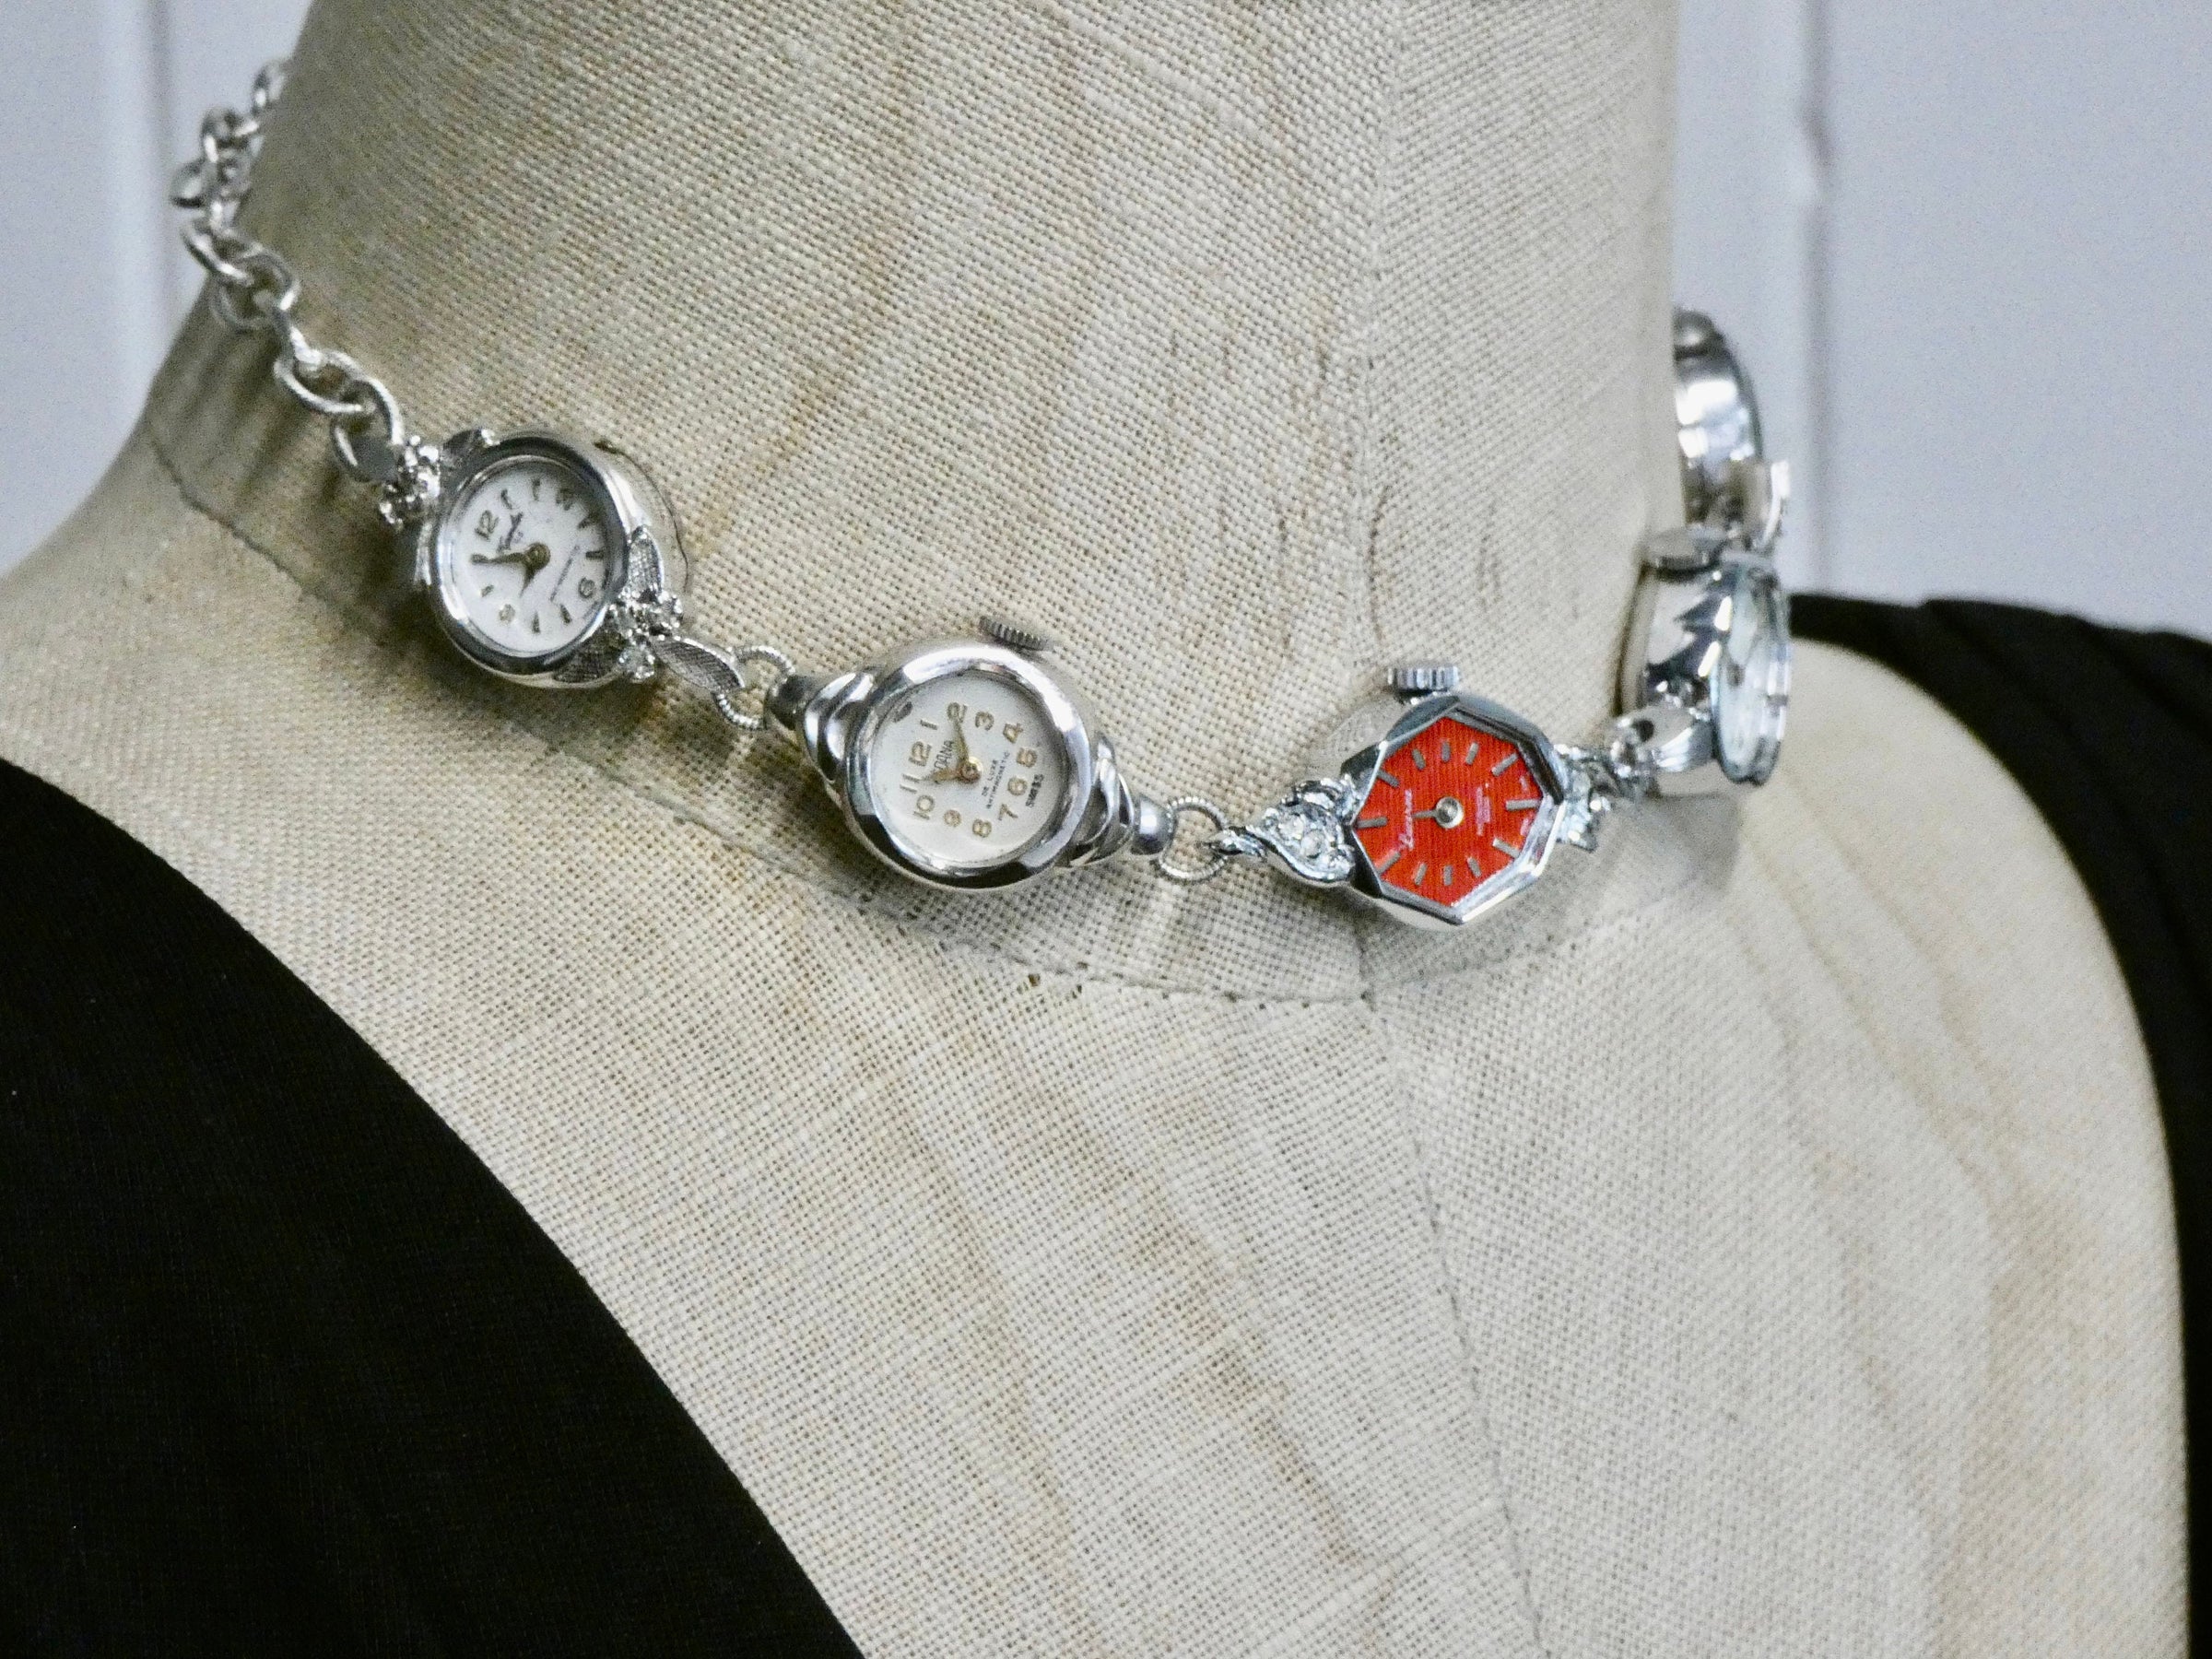 Watch Choker Necklace, Vintage One of a Kind Multi Watch choker, silver watches